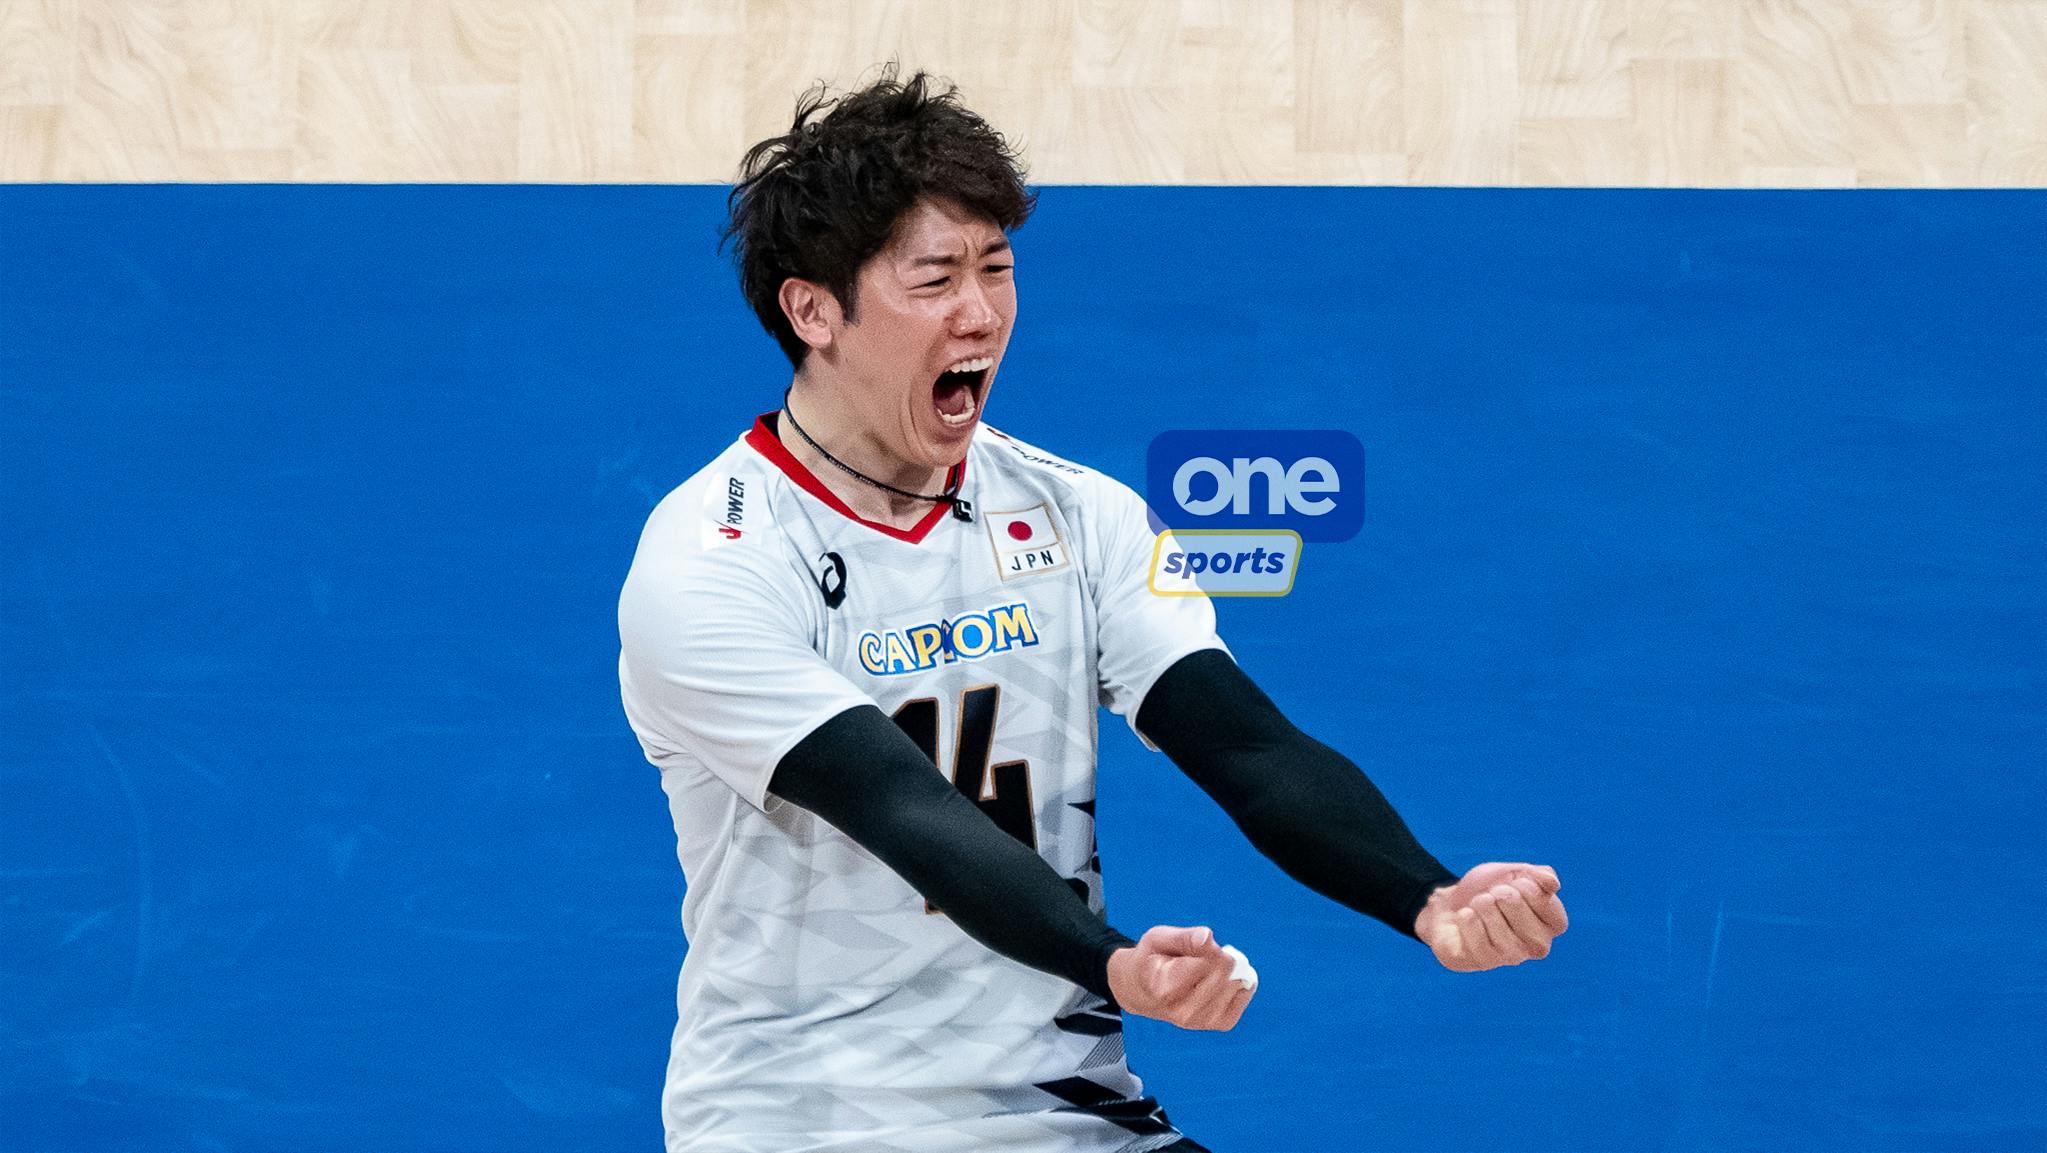 VNL: Yuki Ishikawa erupts for 33 points as Japan stages epic comeback over France for second straight win in Manila leg
